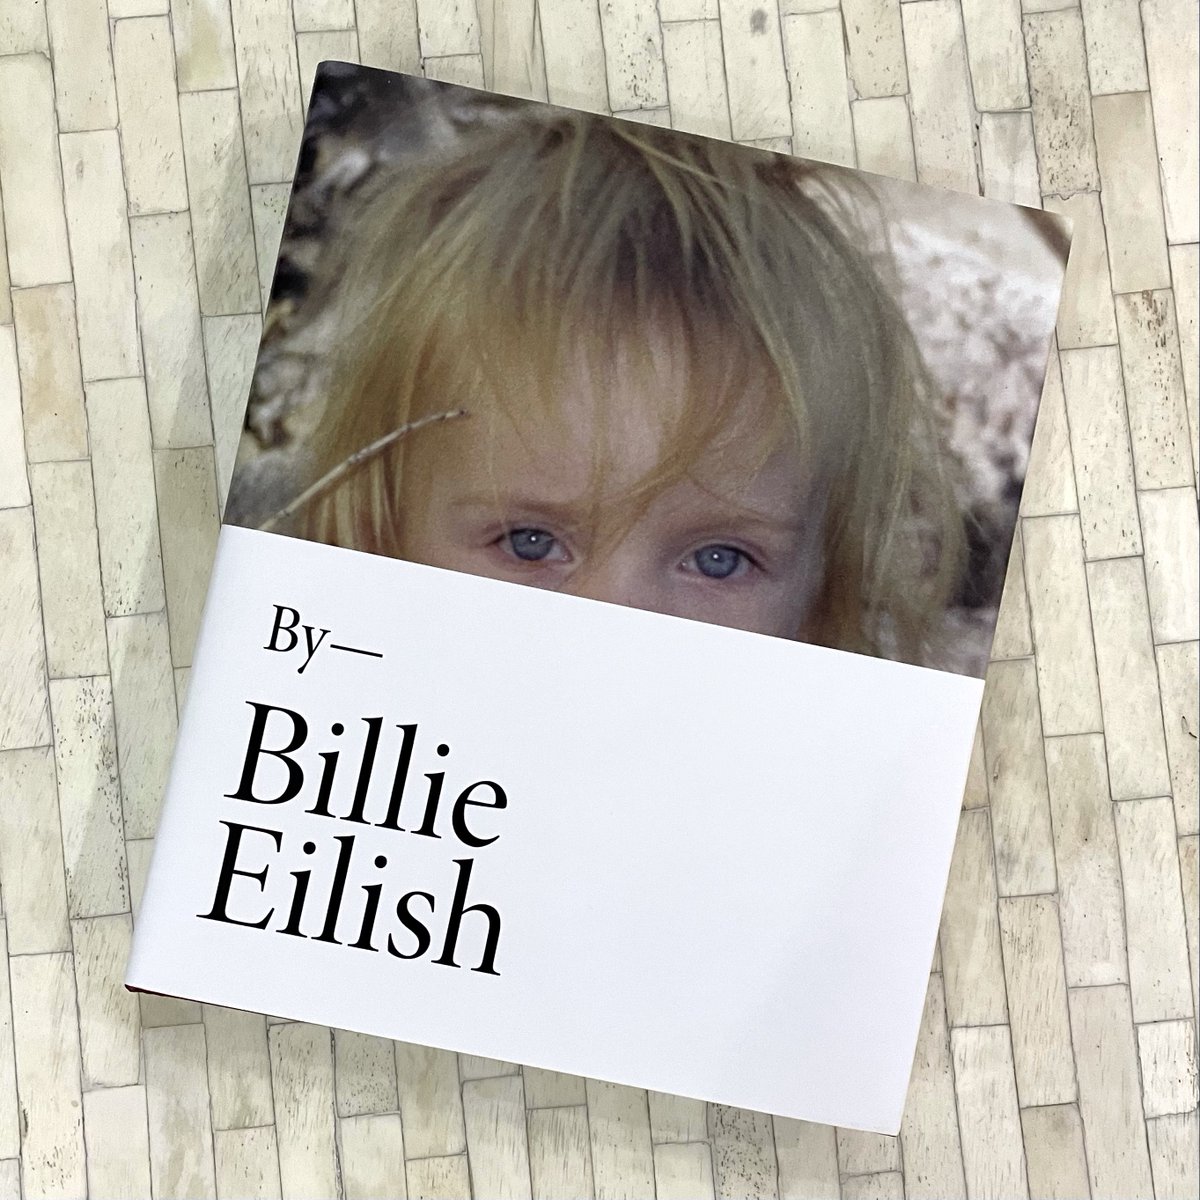 billie eilish on Twitter: "“Billie Eilish” - The photo book by Billie The  book and the audiobook companion (narrated by Billie) are available now.  https://t.co/PAYxvTW64A https://t.co/vWFmq3502D" / Twitter